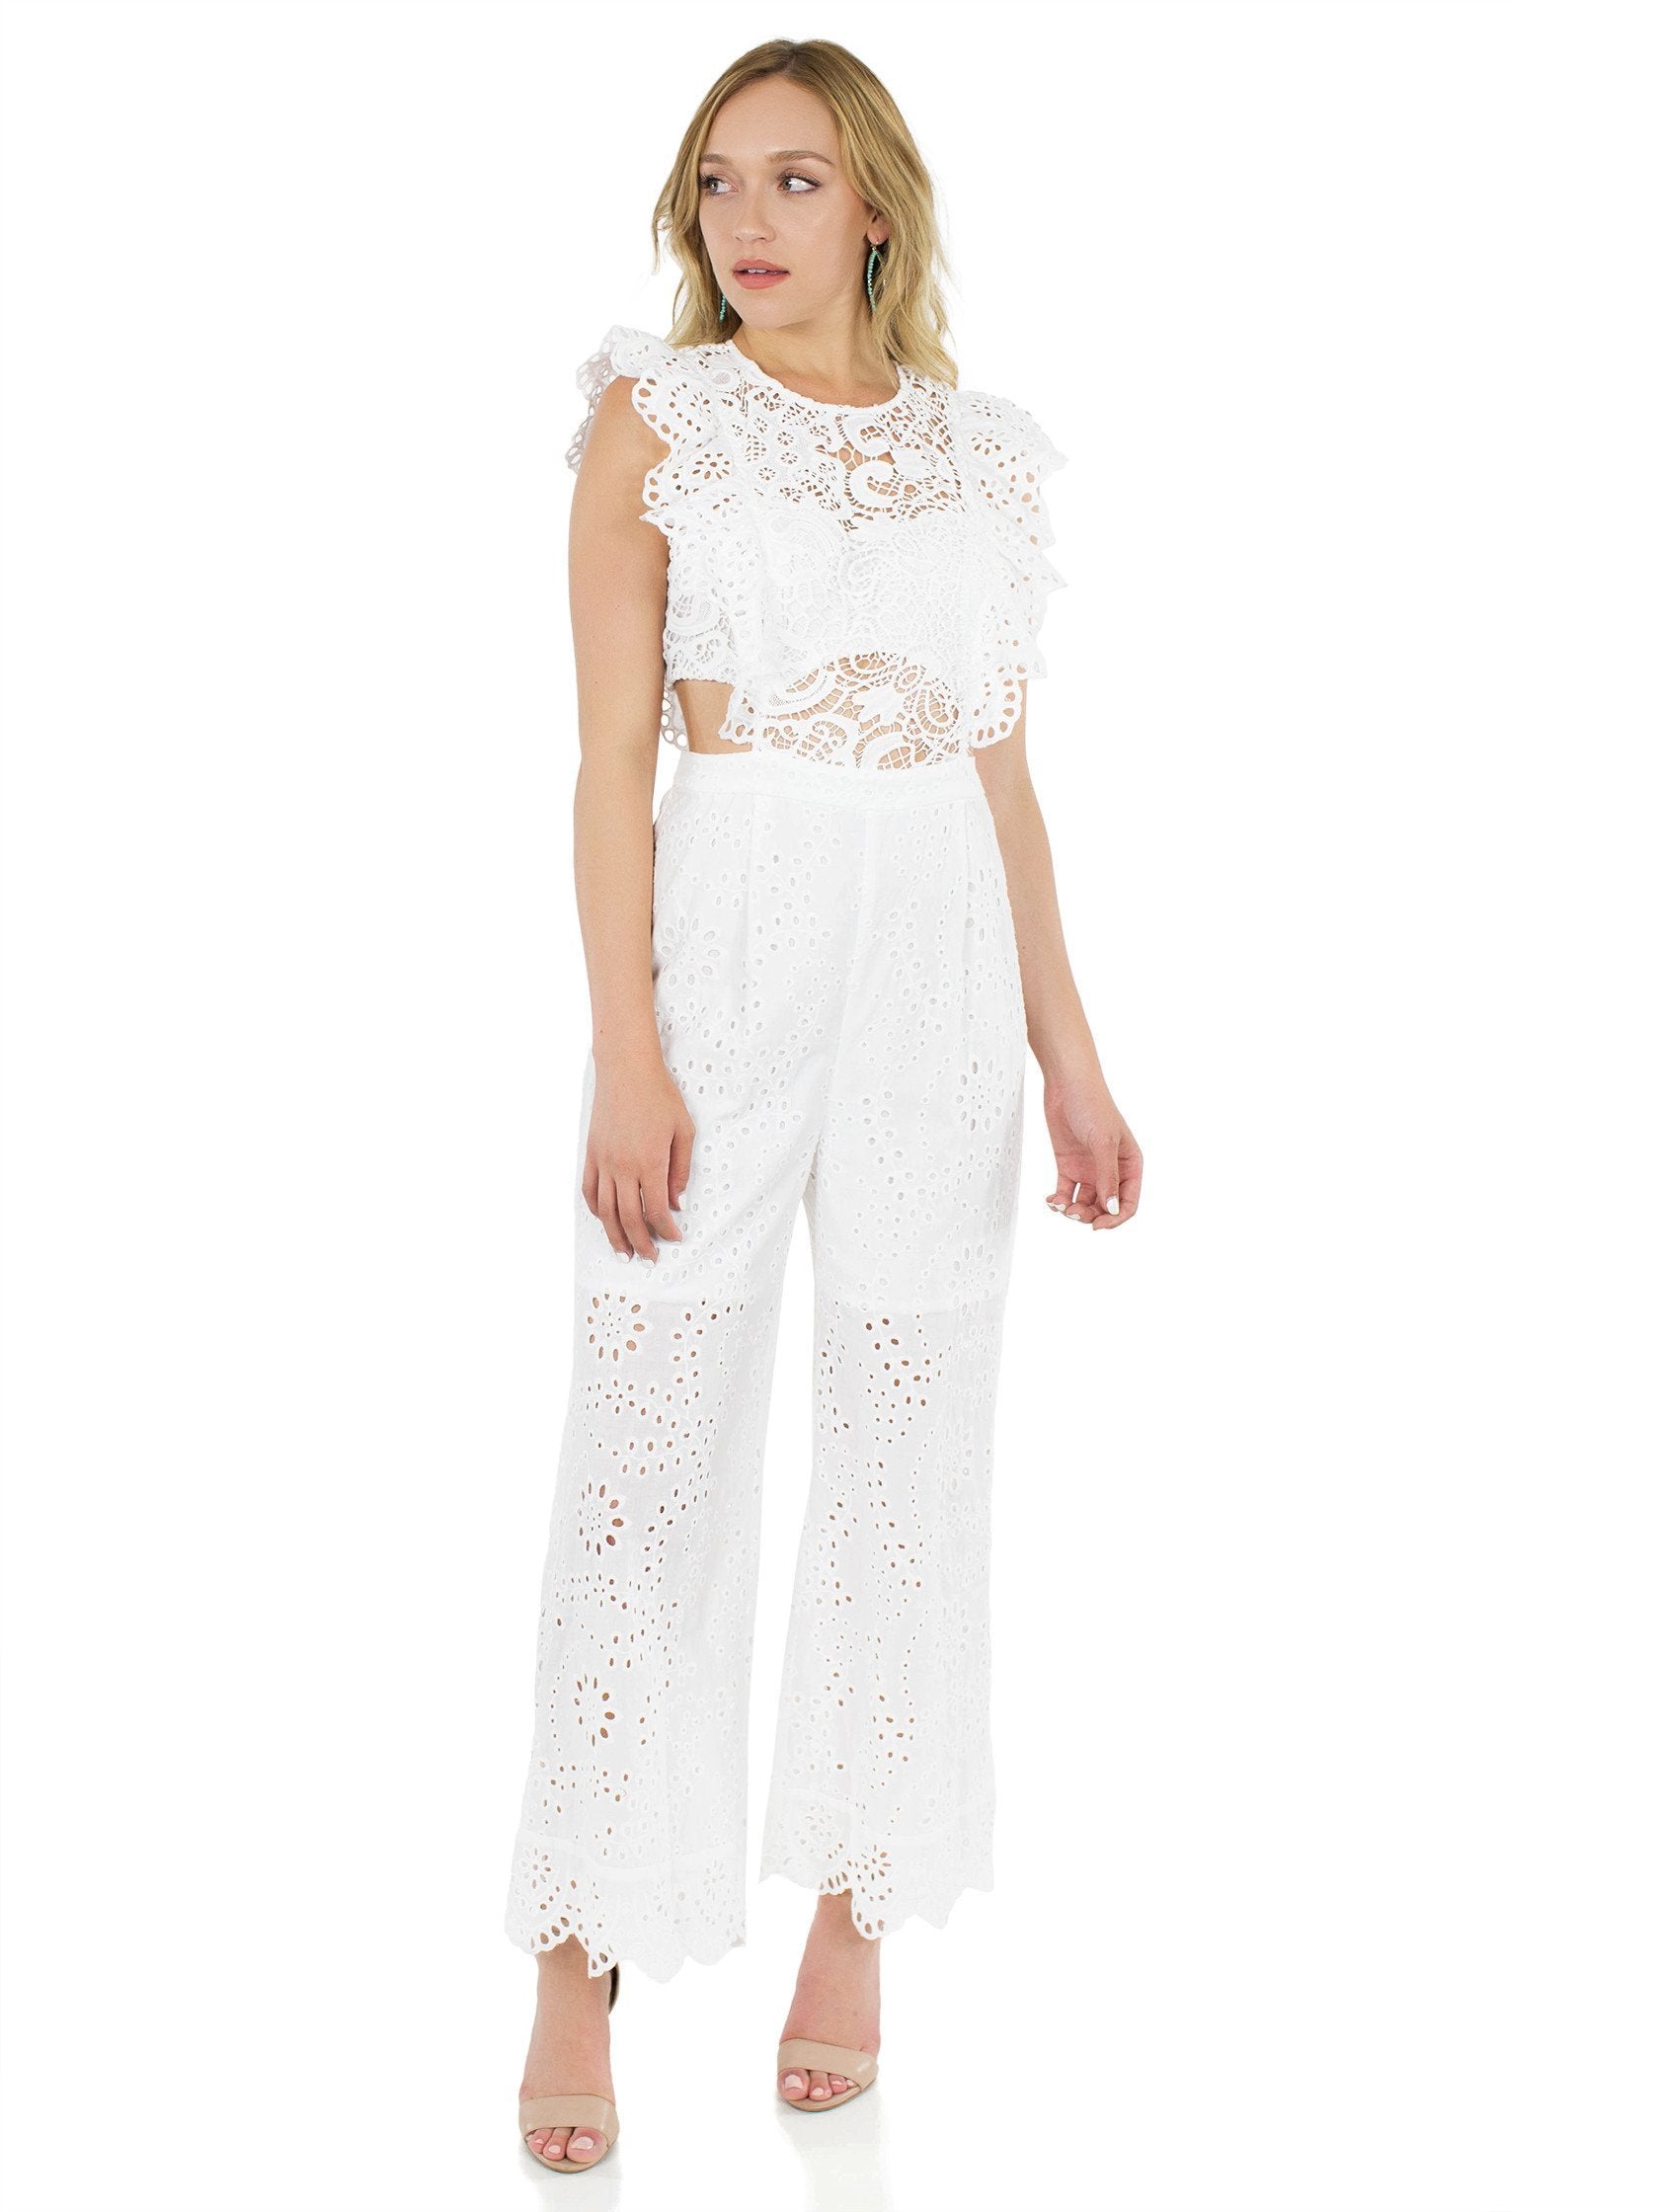 Girl outfit in a jumpsuit rental from Nightcap Clothing called Nightcap Eyelet Apron Jumpsuit